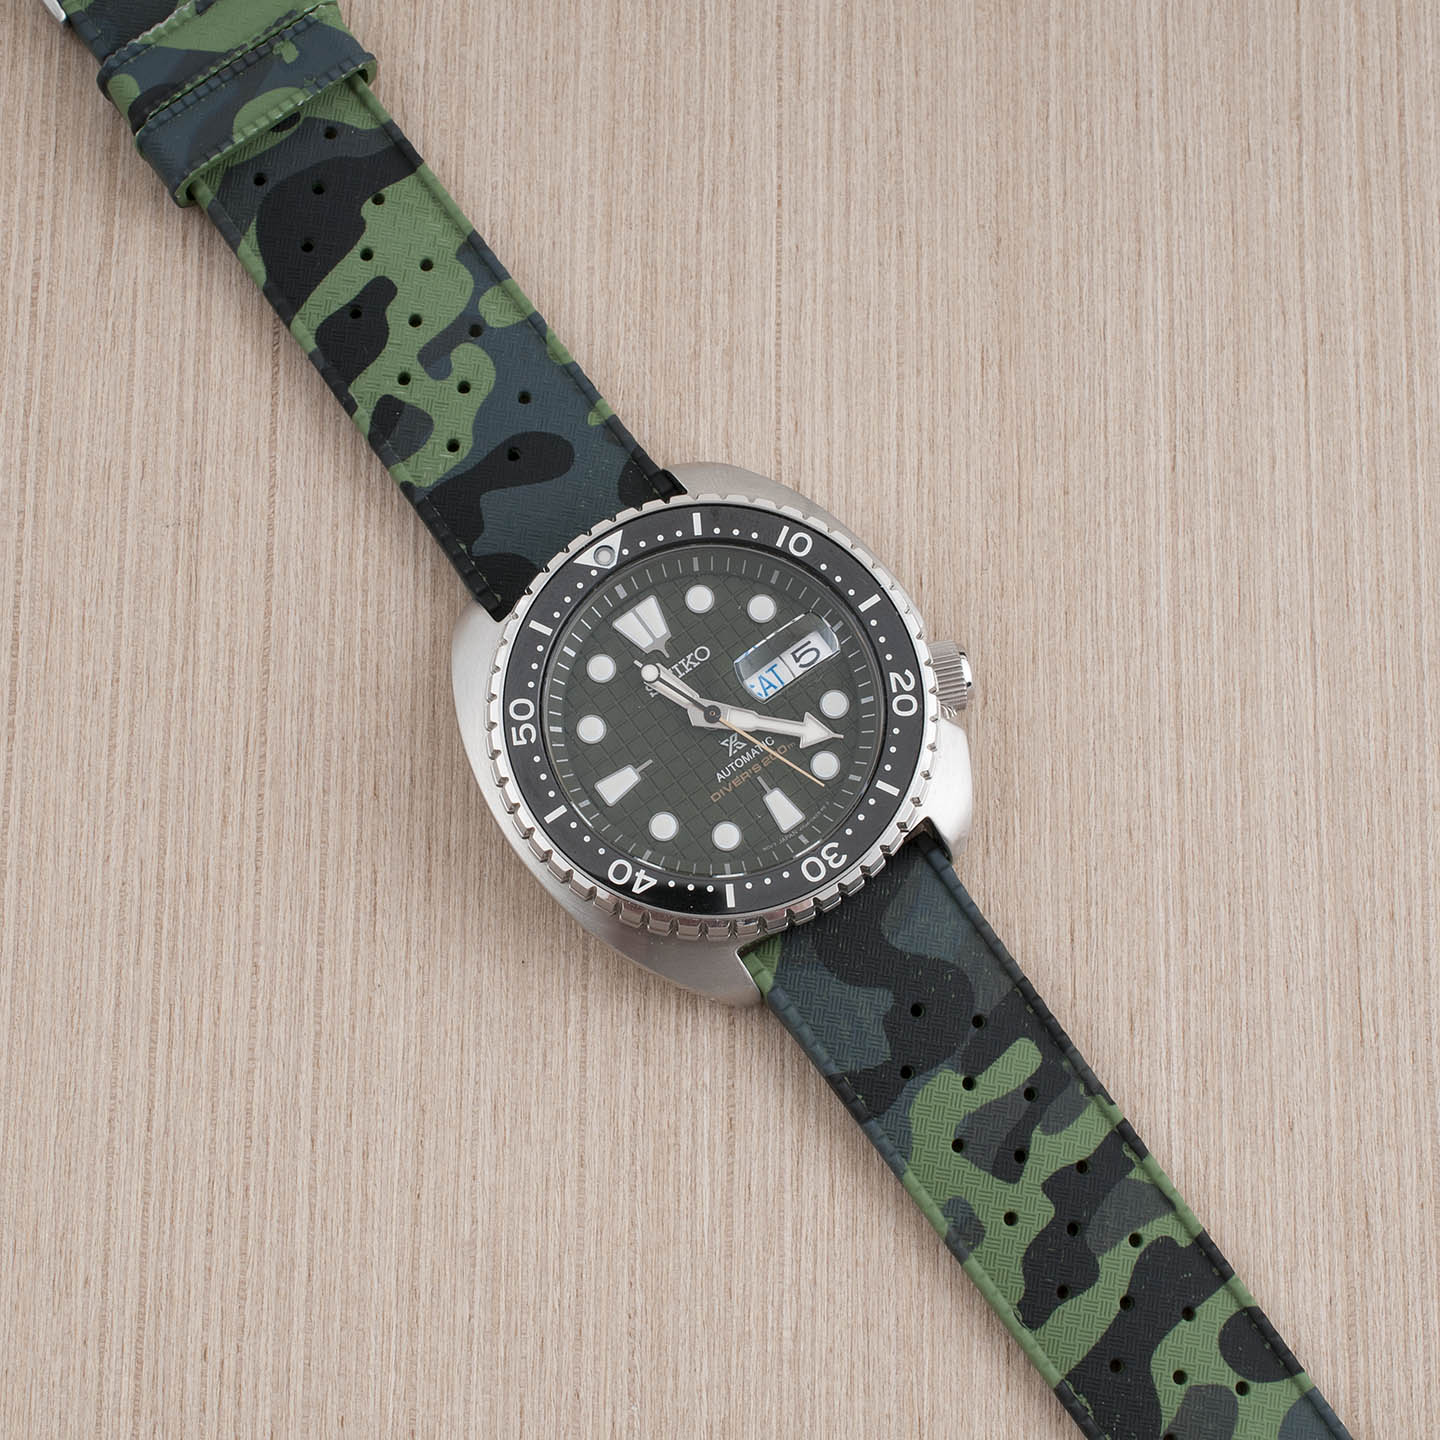 Tropical retro vintage replacement watch strap band FKM rubber tropic 19mm 20mm 21mm 22mm green camo camouflage seiko king turtle grenade srpe03